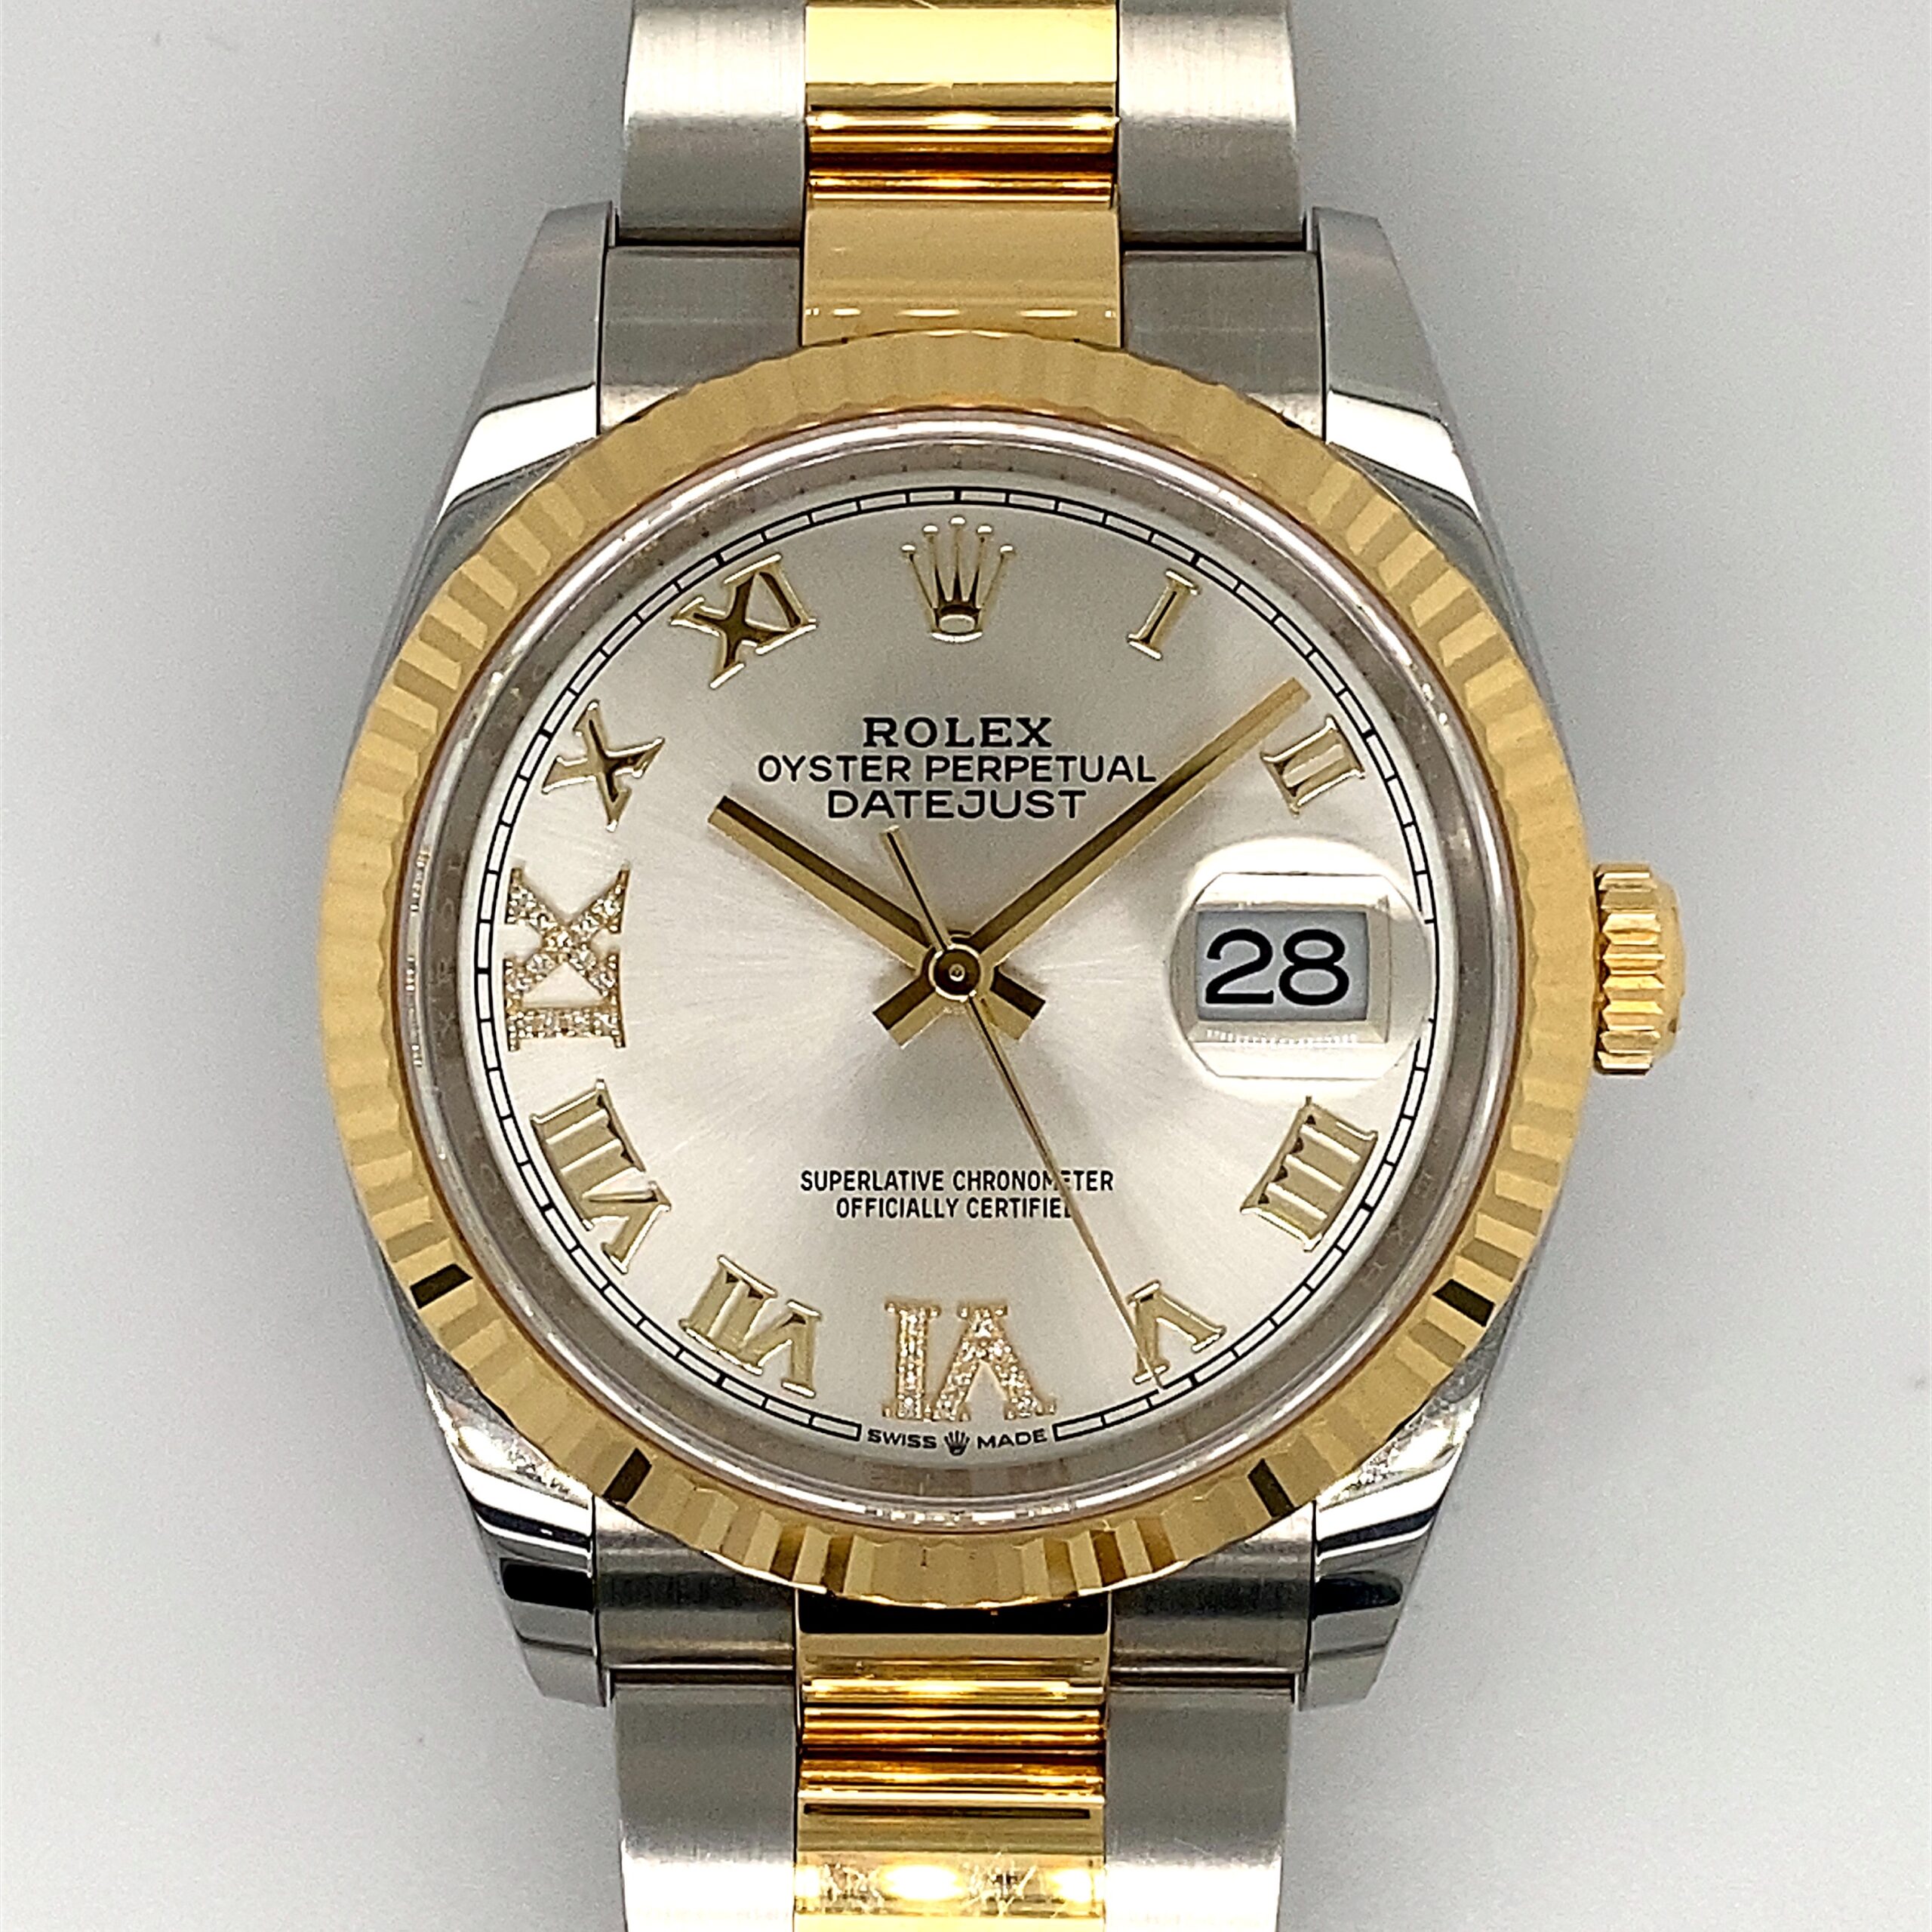 ROLEX DATEJUST 36MM YELLOW GOLD 126233 DIAMOND DIAL - HG Watches ...